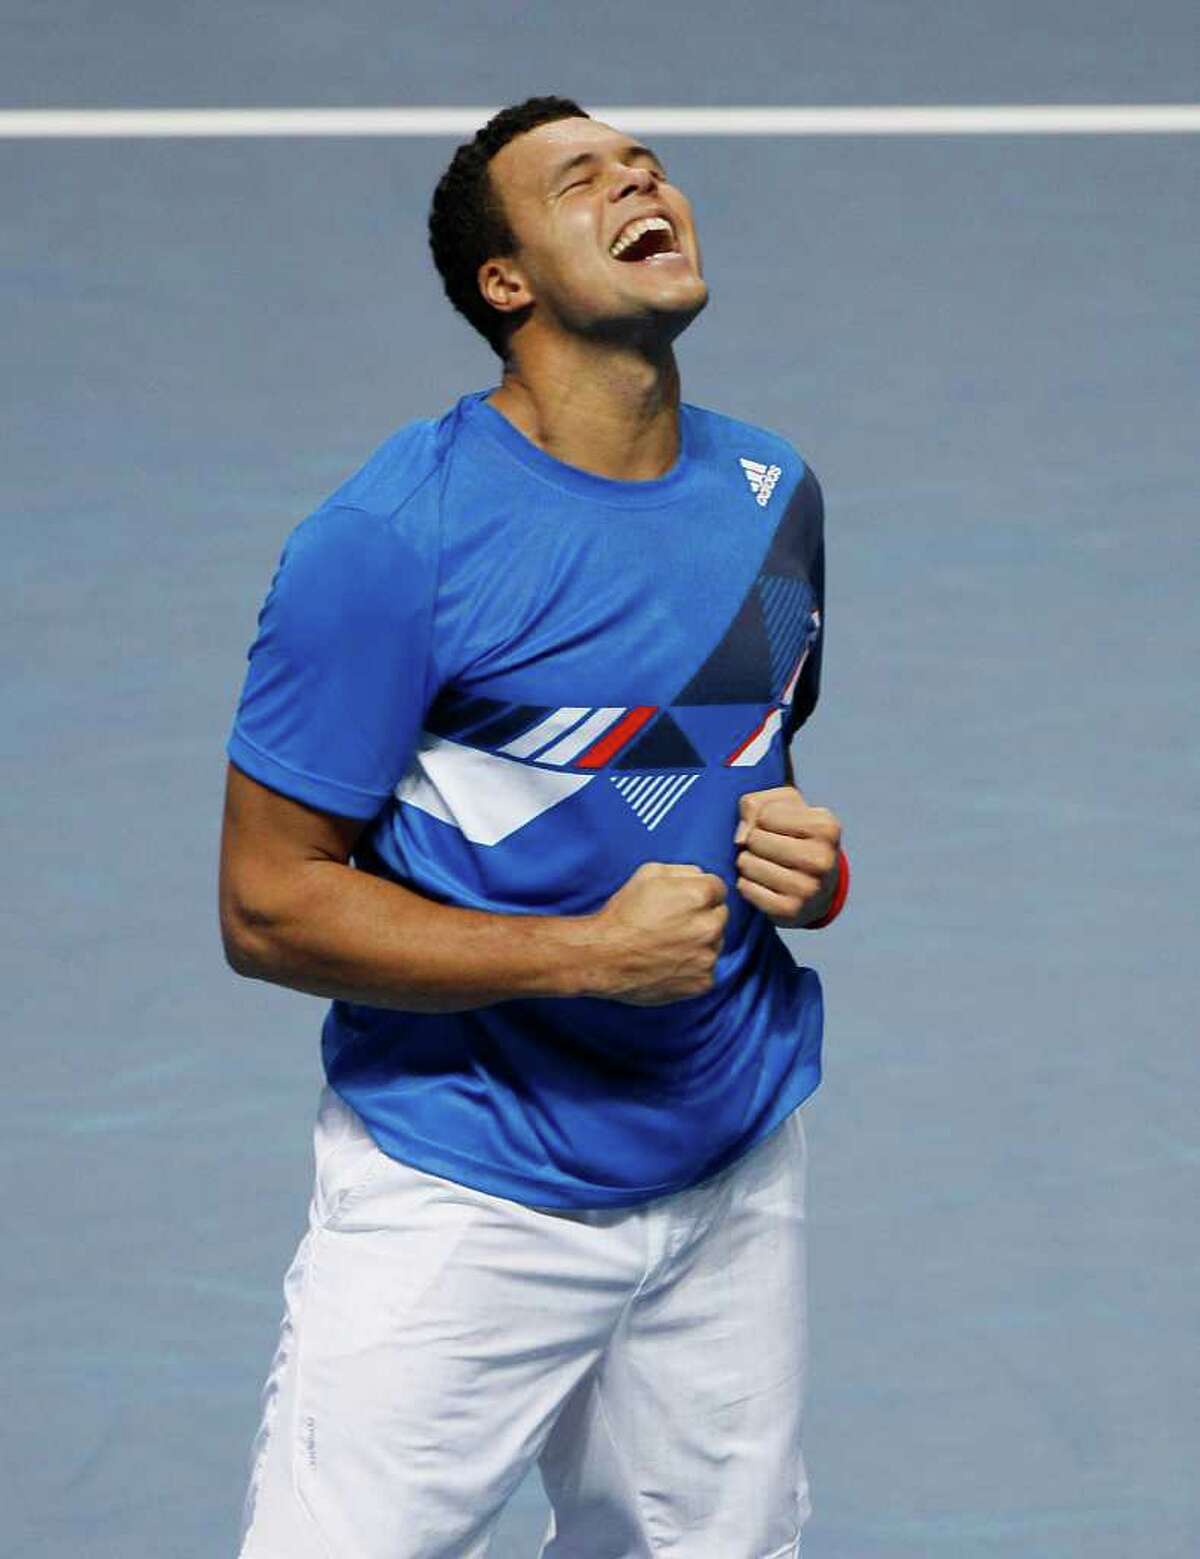 KIRSTY WIGGLESWORTH: ASSOCIATED PRESS BIG WIN: Jo-Wilfried Tsonga savors the moment after upsetting Rafael Nadal at the ATP World Tour Finals in London on Thursday.